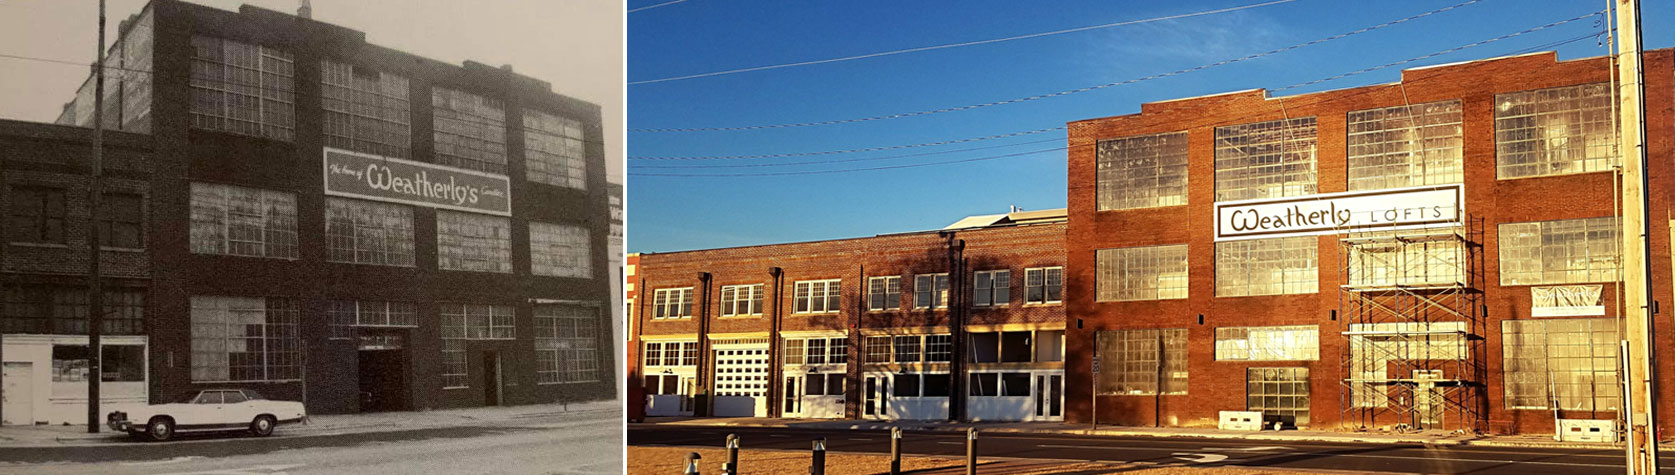 Weatherly Lofts before and after historic photo